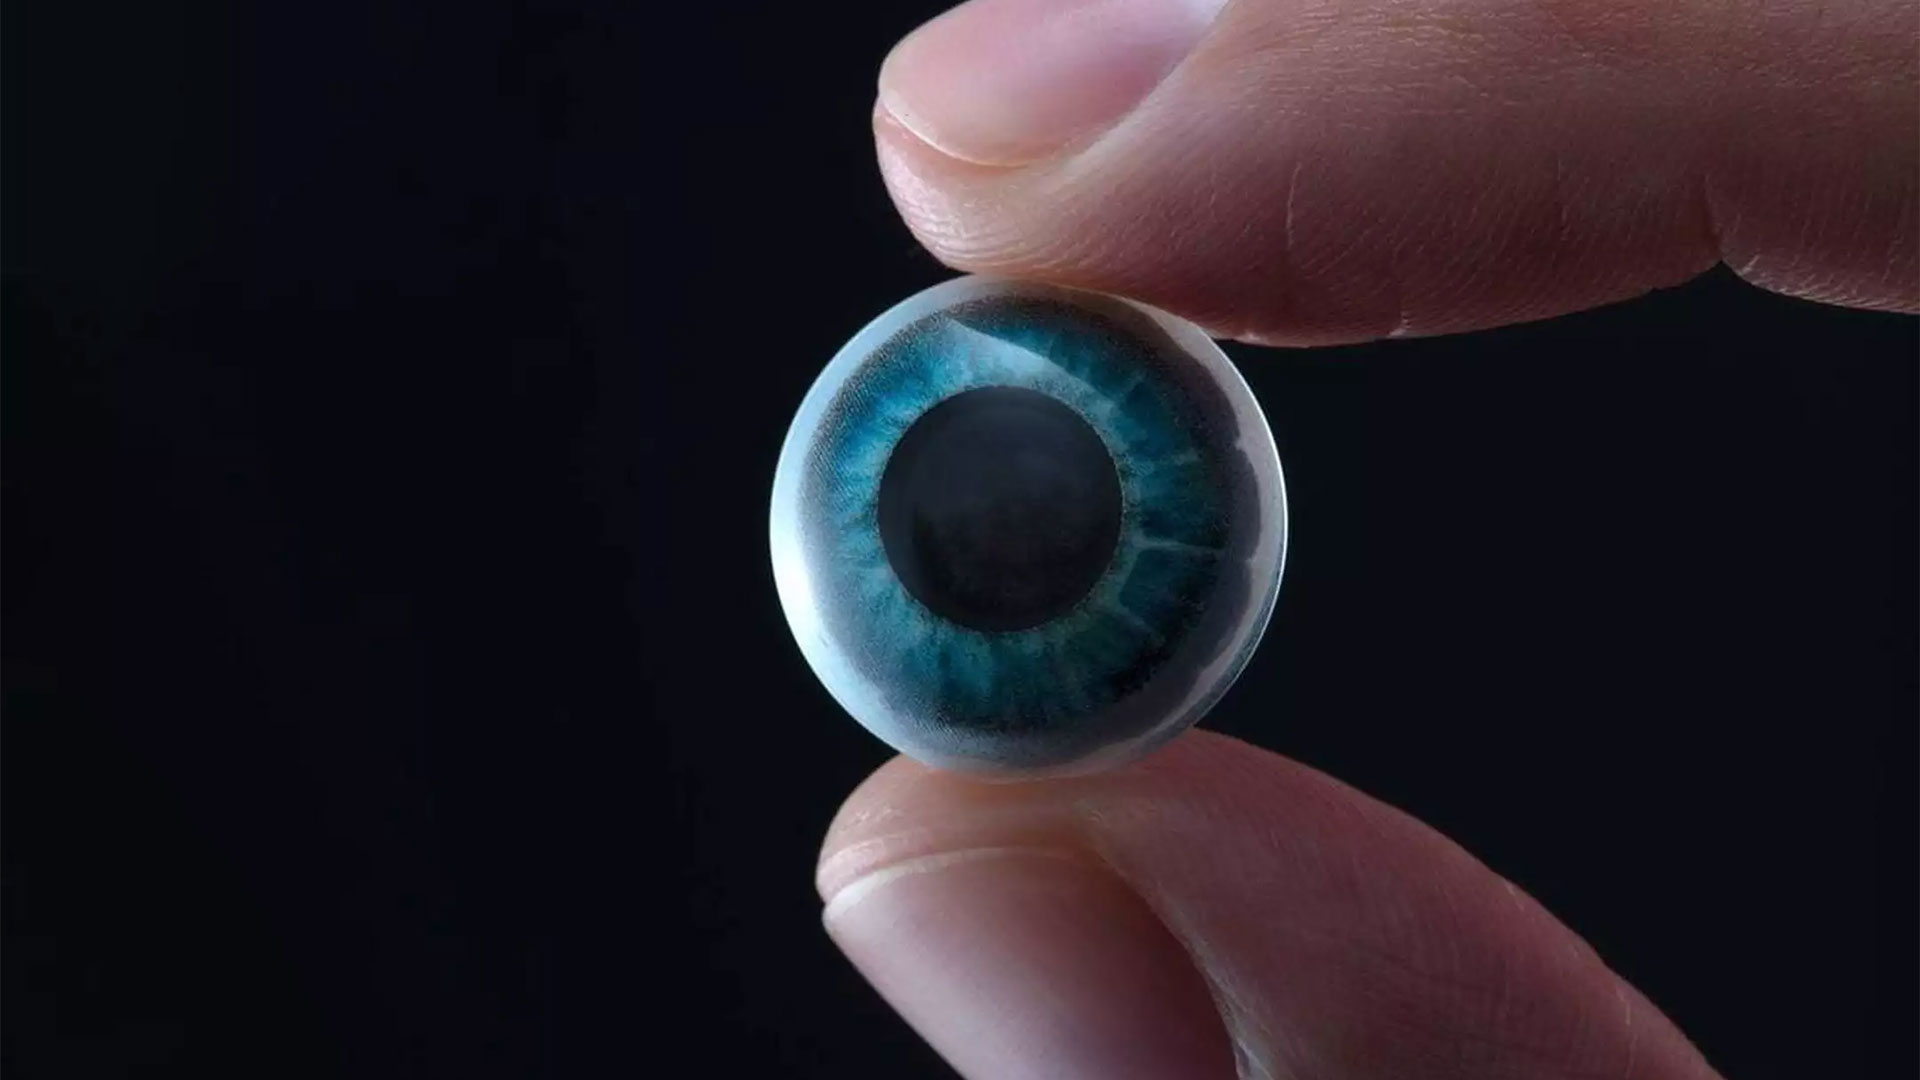 mojo vision ar contact lenses hands on